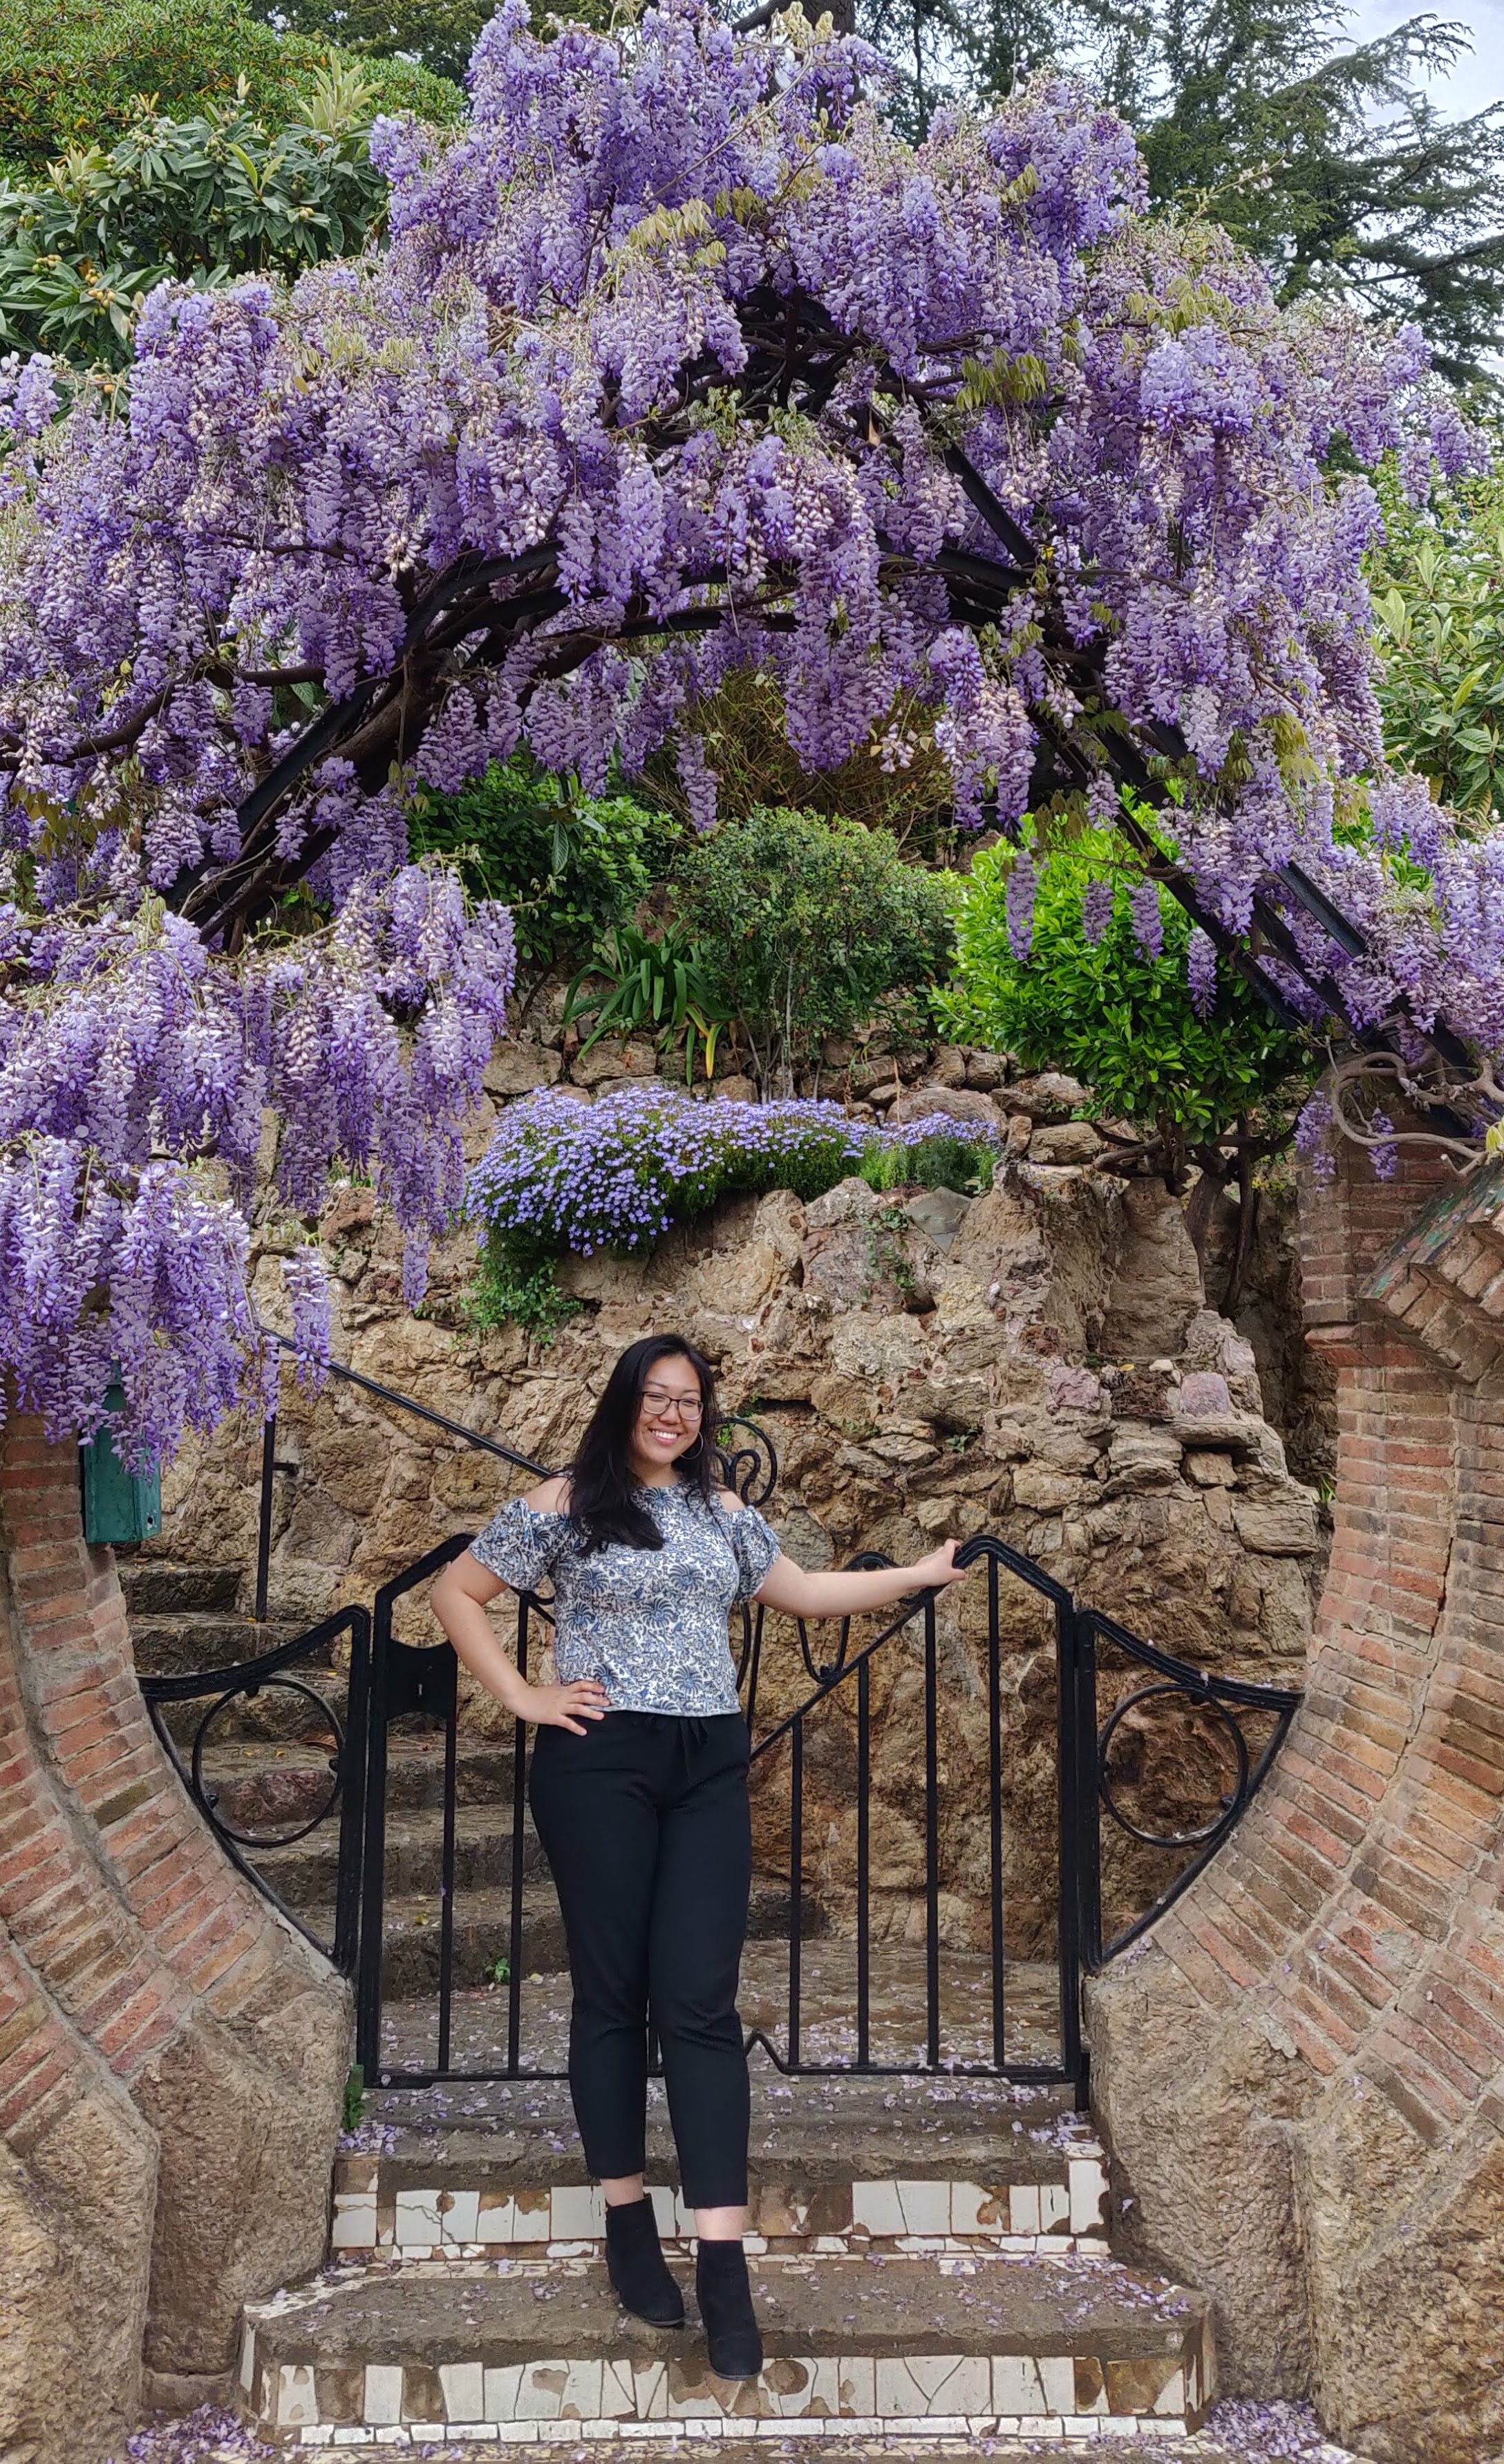 Lisa Han posing under a circular archway covered in lilacs